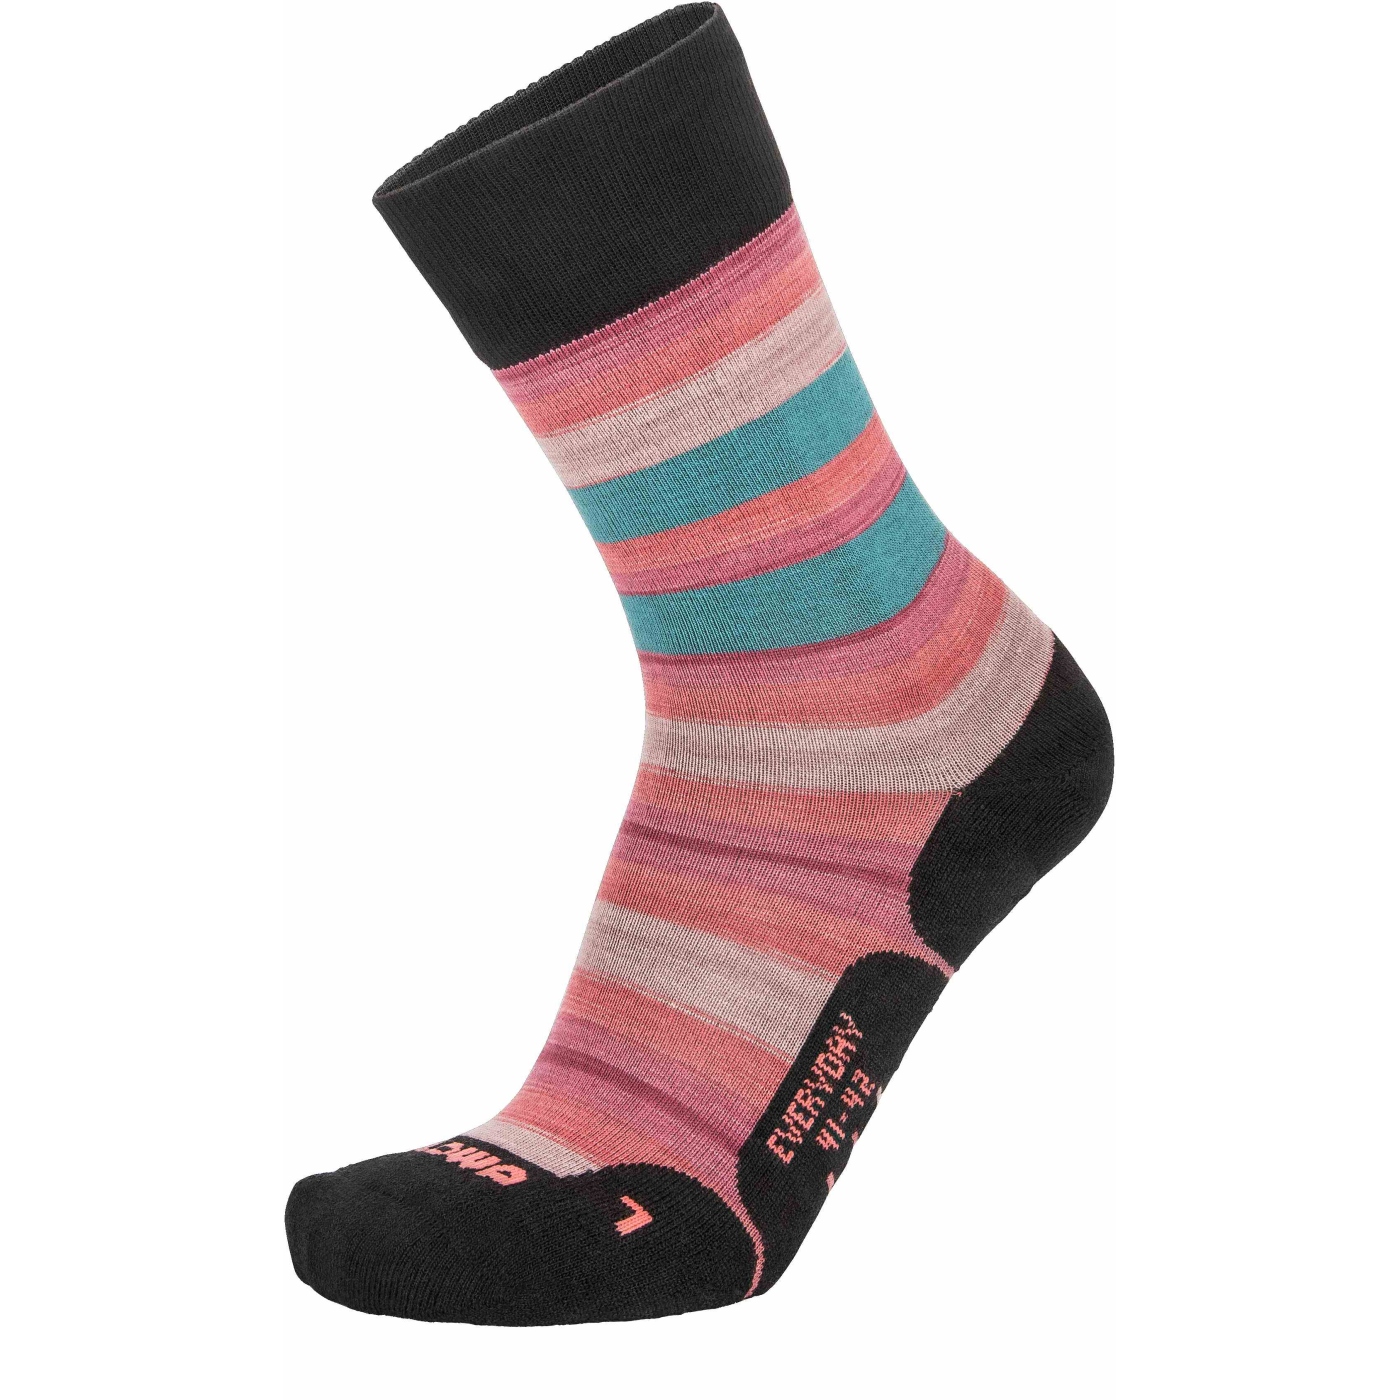 Picture of LOWA Everyday Socks - rosé/turquoise striped